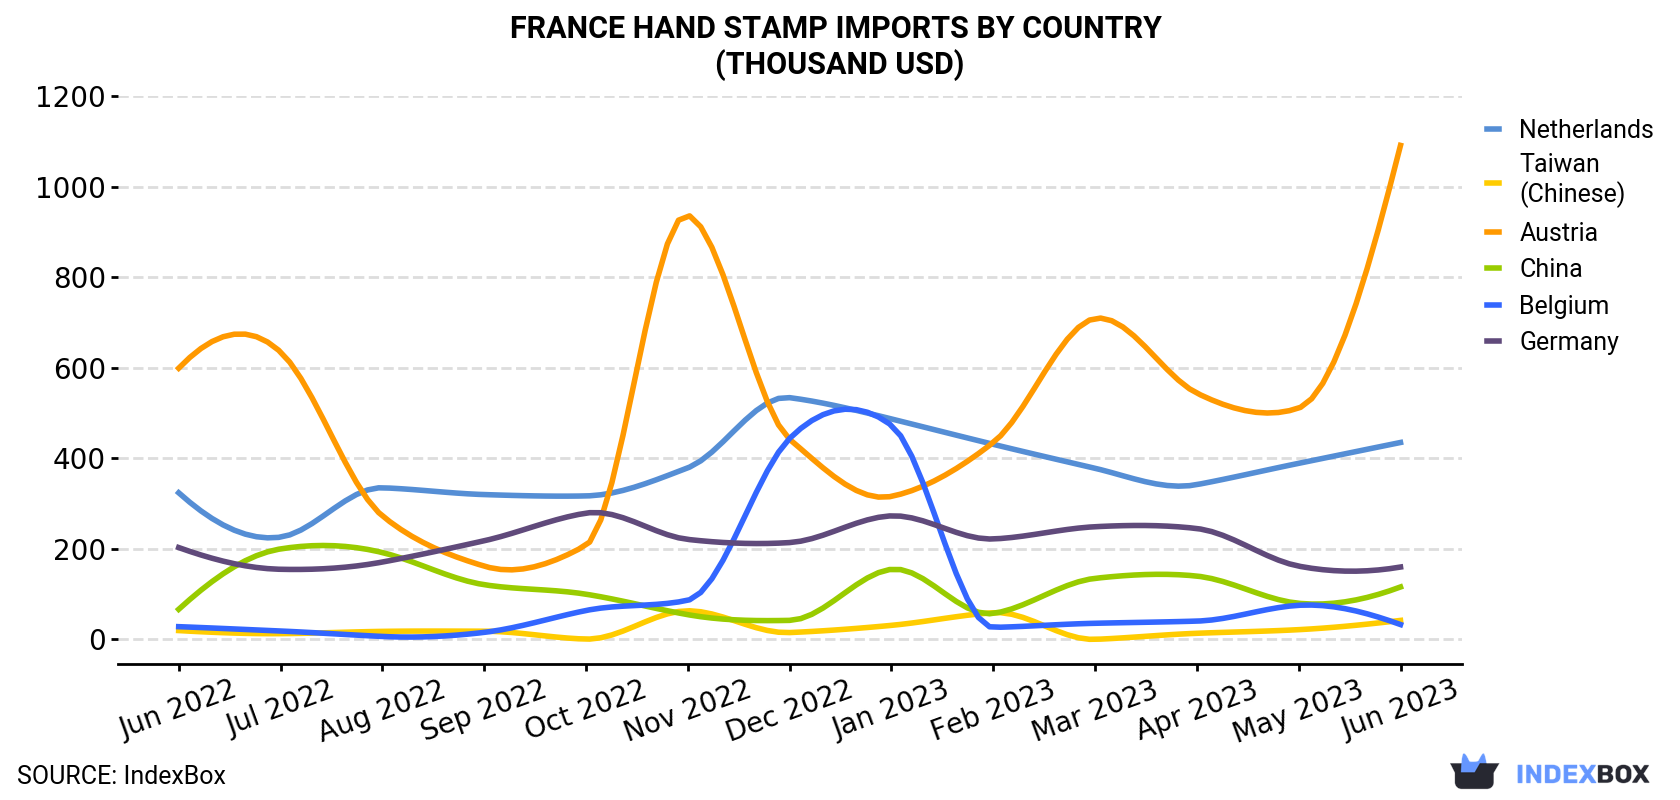 France Hand Stamp Imports By Country (Thousand USD)